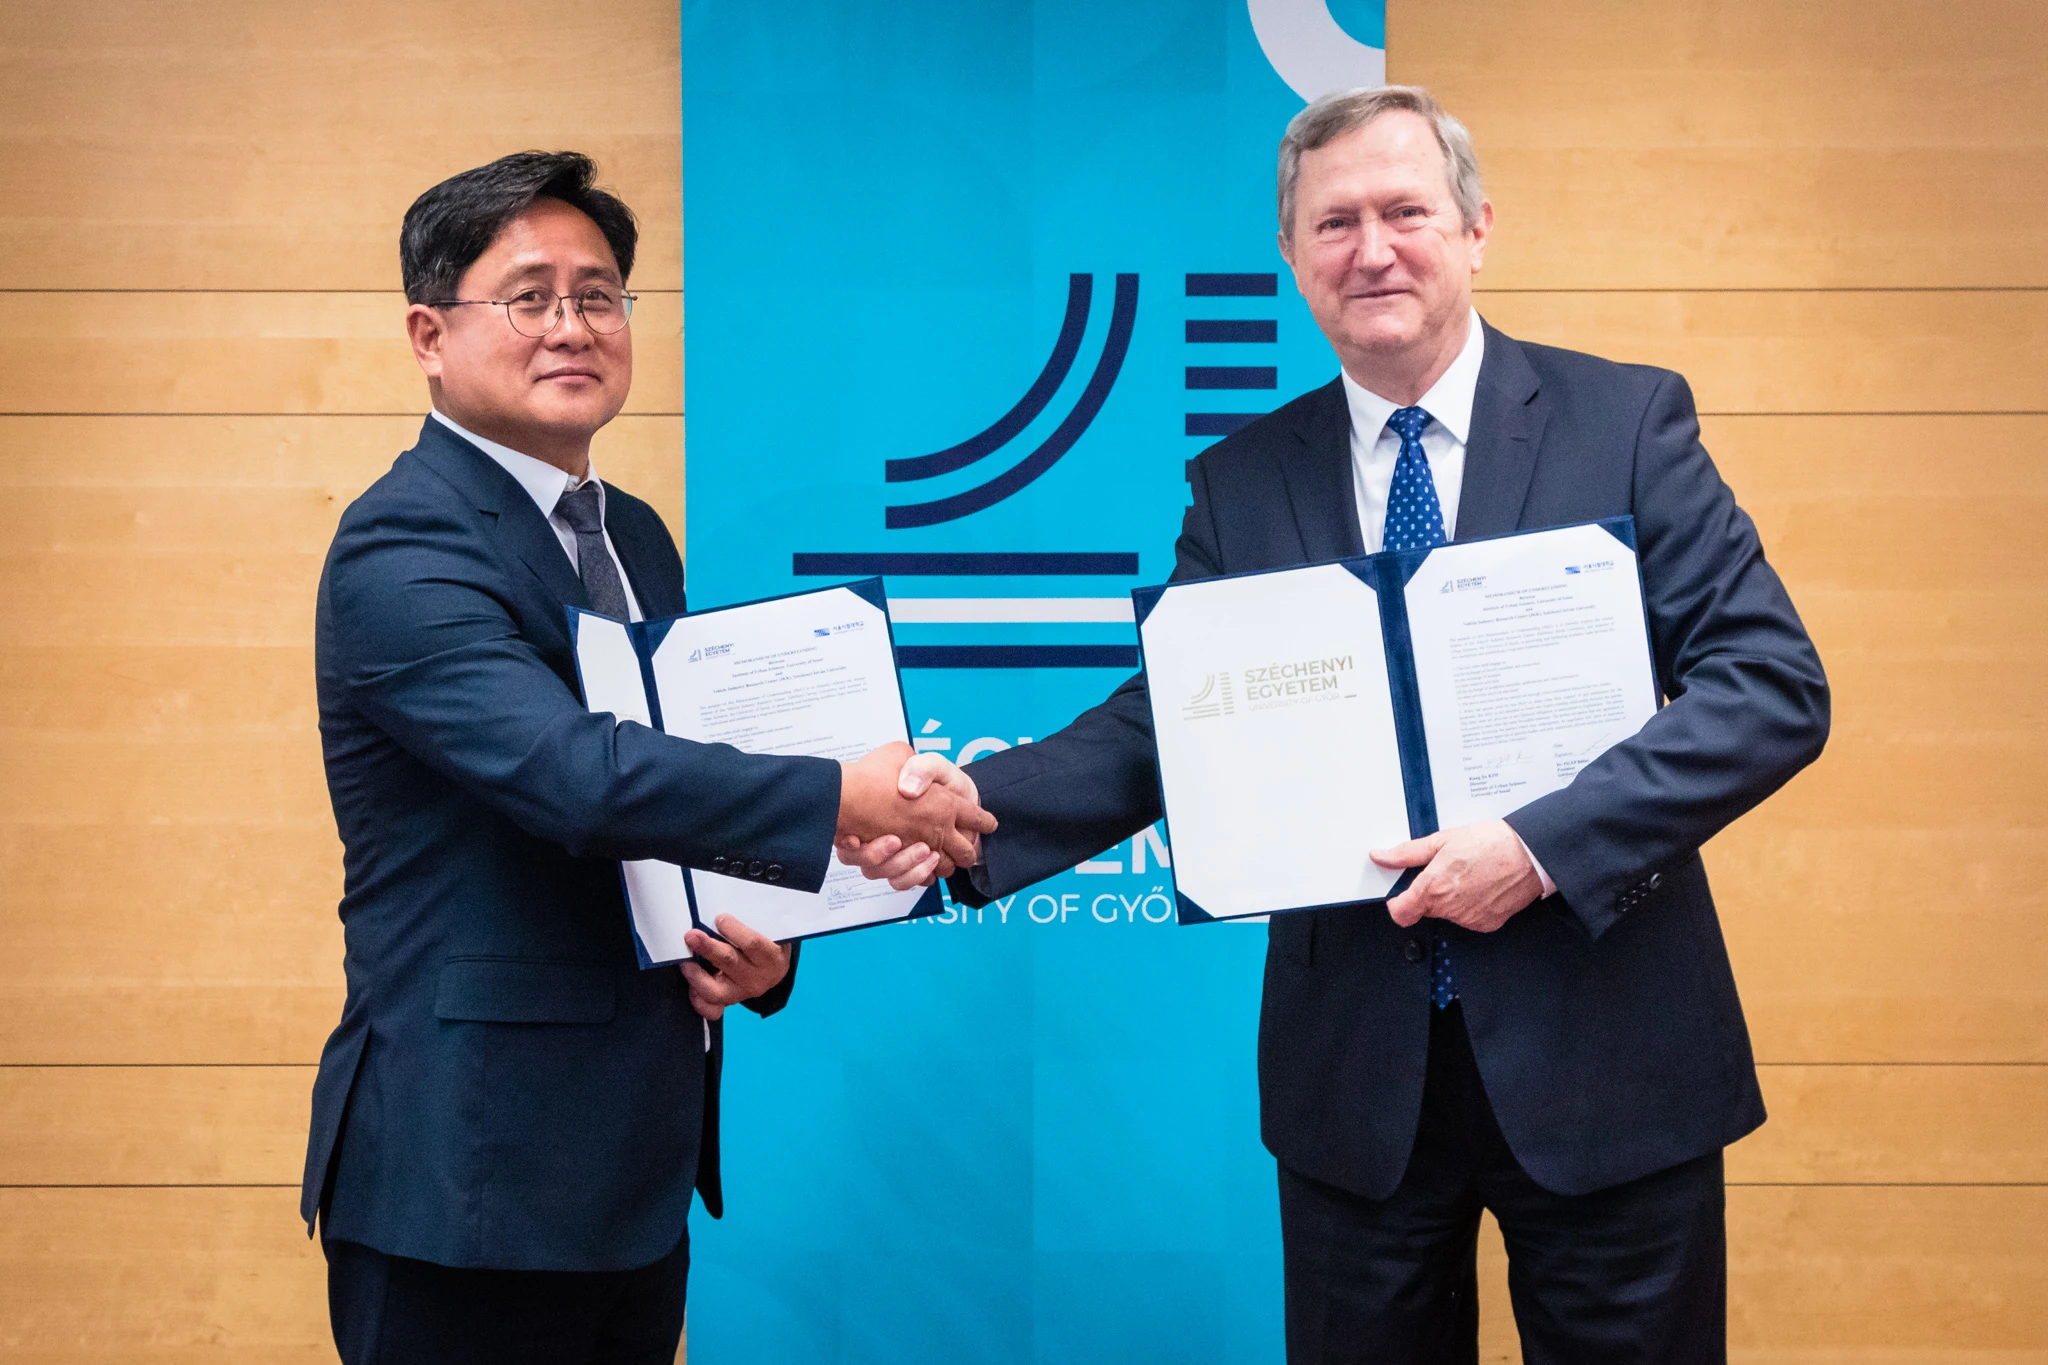 sze-has-entered-into-partnership-with-the-institute-of-urban-sciences-of-the-university-of-seoul (5).webp